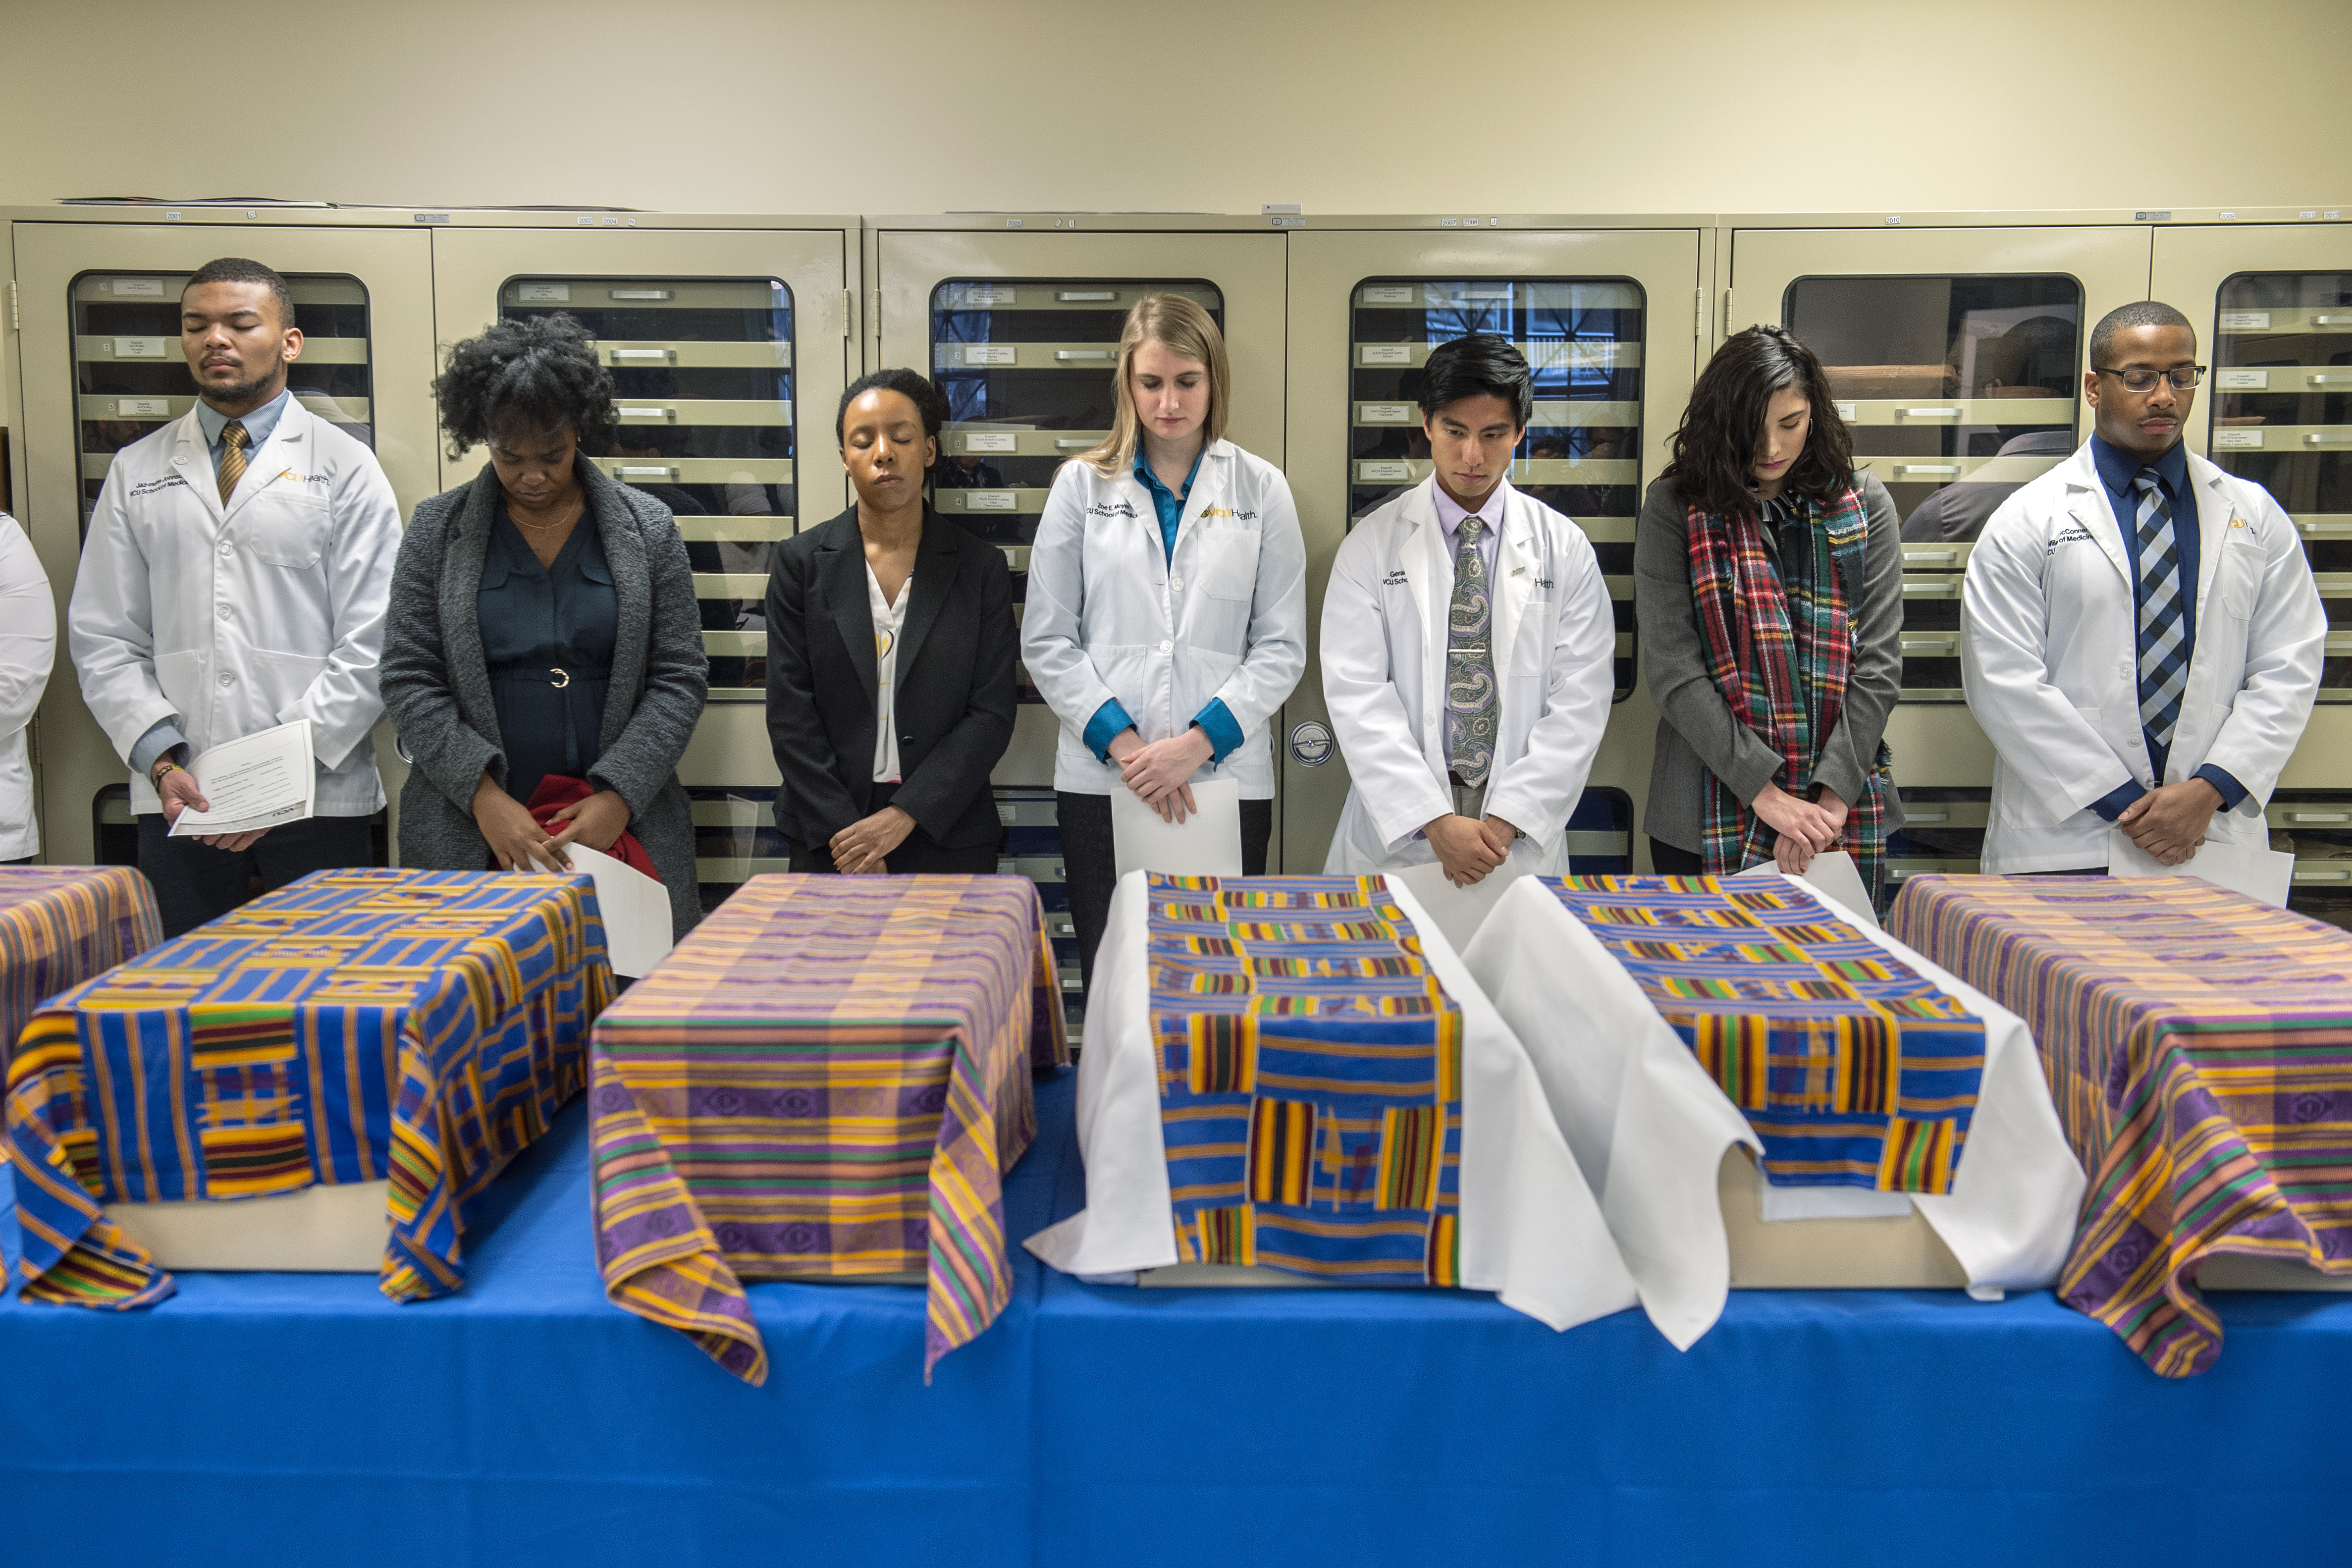 VCU Health Sciences students bow their heads in front of the ancestral remains of individuals recovered from the East Marshall Street Well during a prayer given by Del. Delores McQuinn. Nov. 25, 2019.